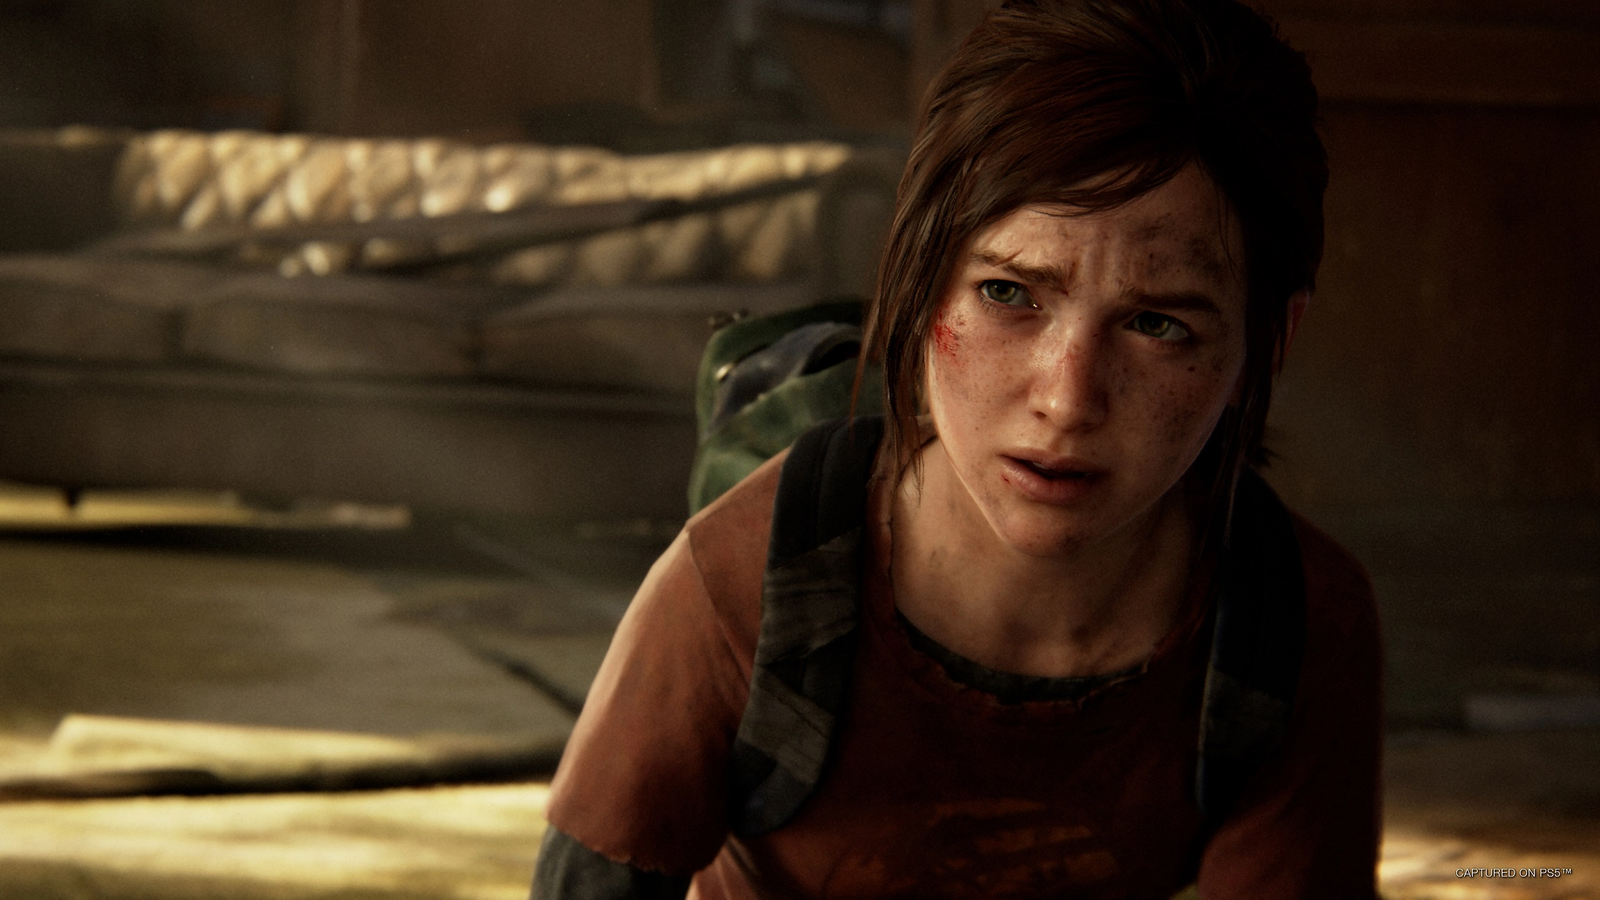 IGN on X: The Last of Us Part 1 is being remade from the ground